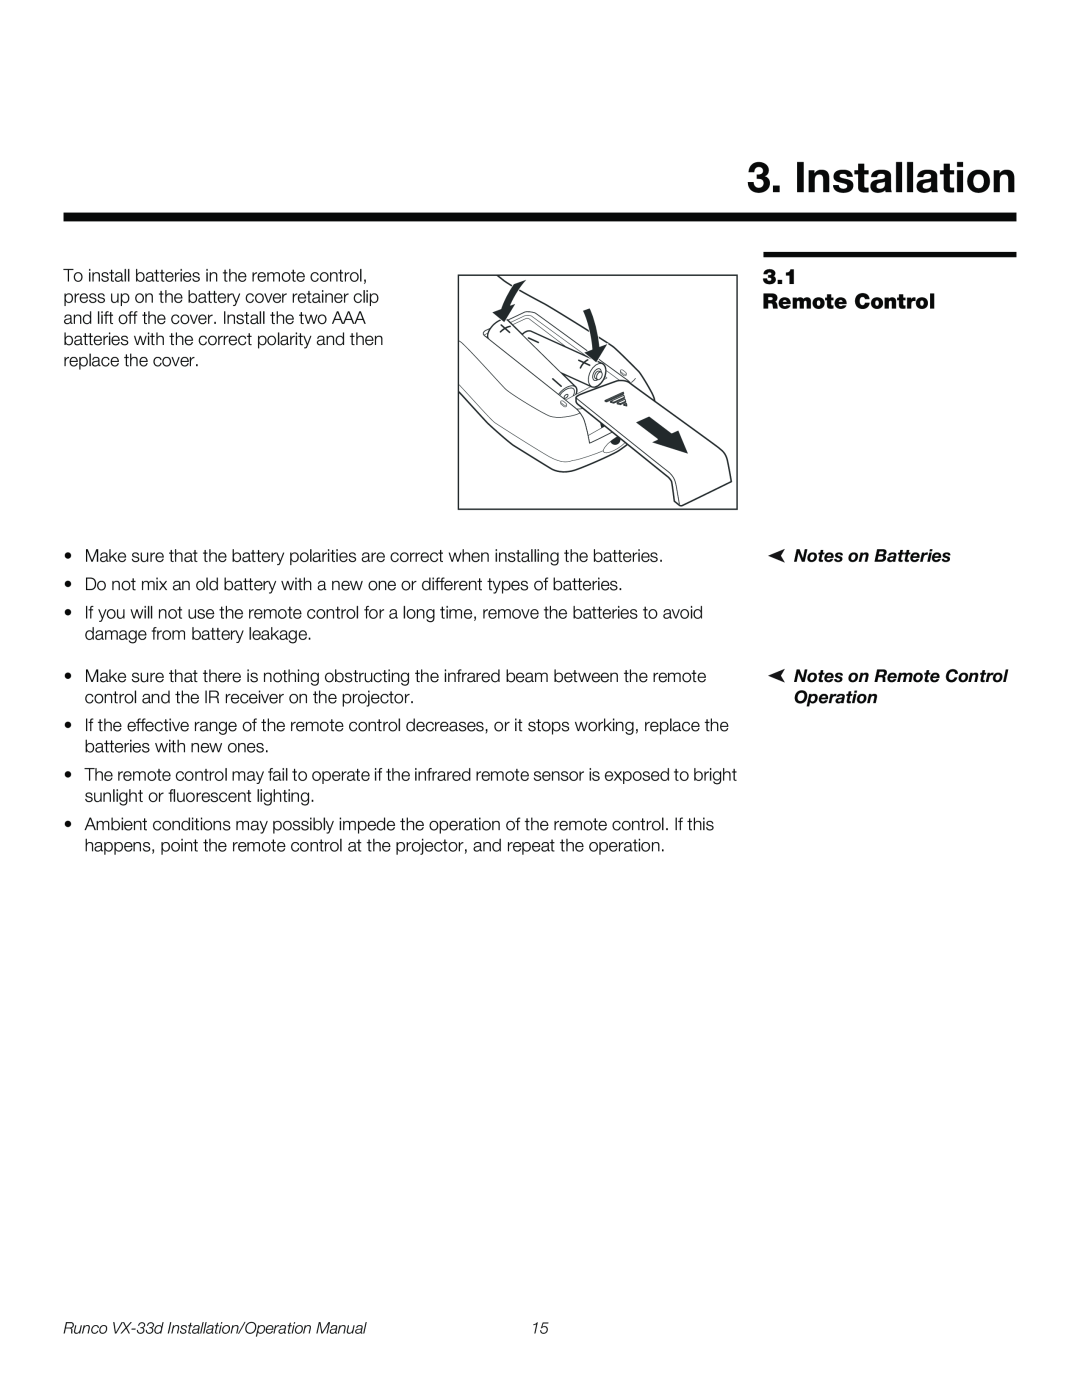 Runco VX-33D operation manual Installation, Notes on Batteries Notes on Remote Control Operation 